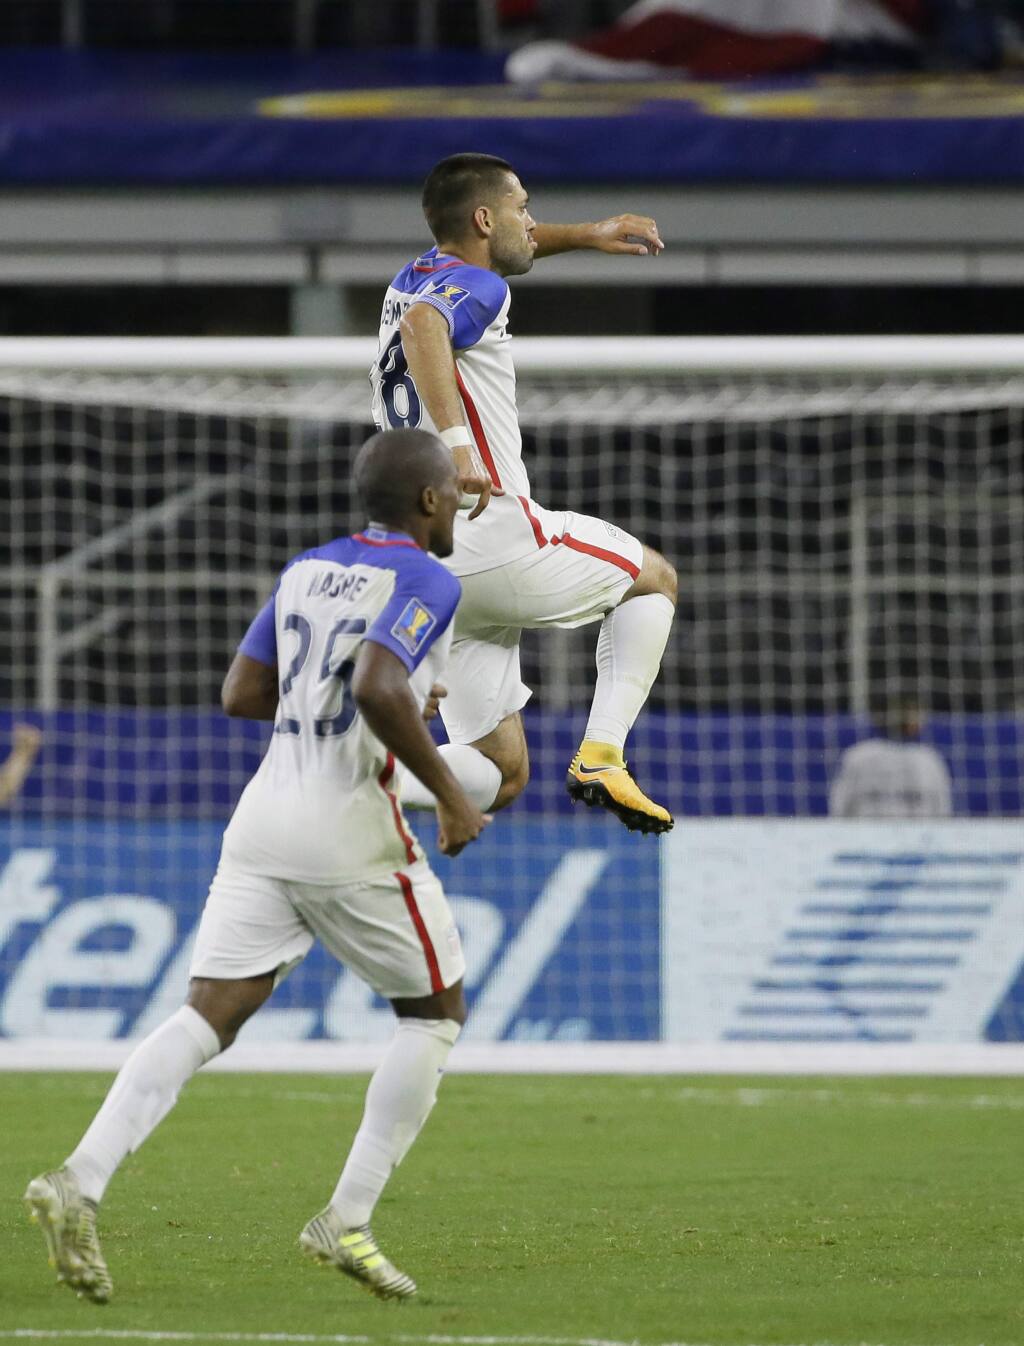 Clint Dempsey ties US goal record as team USA advances to Gold Cup final